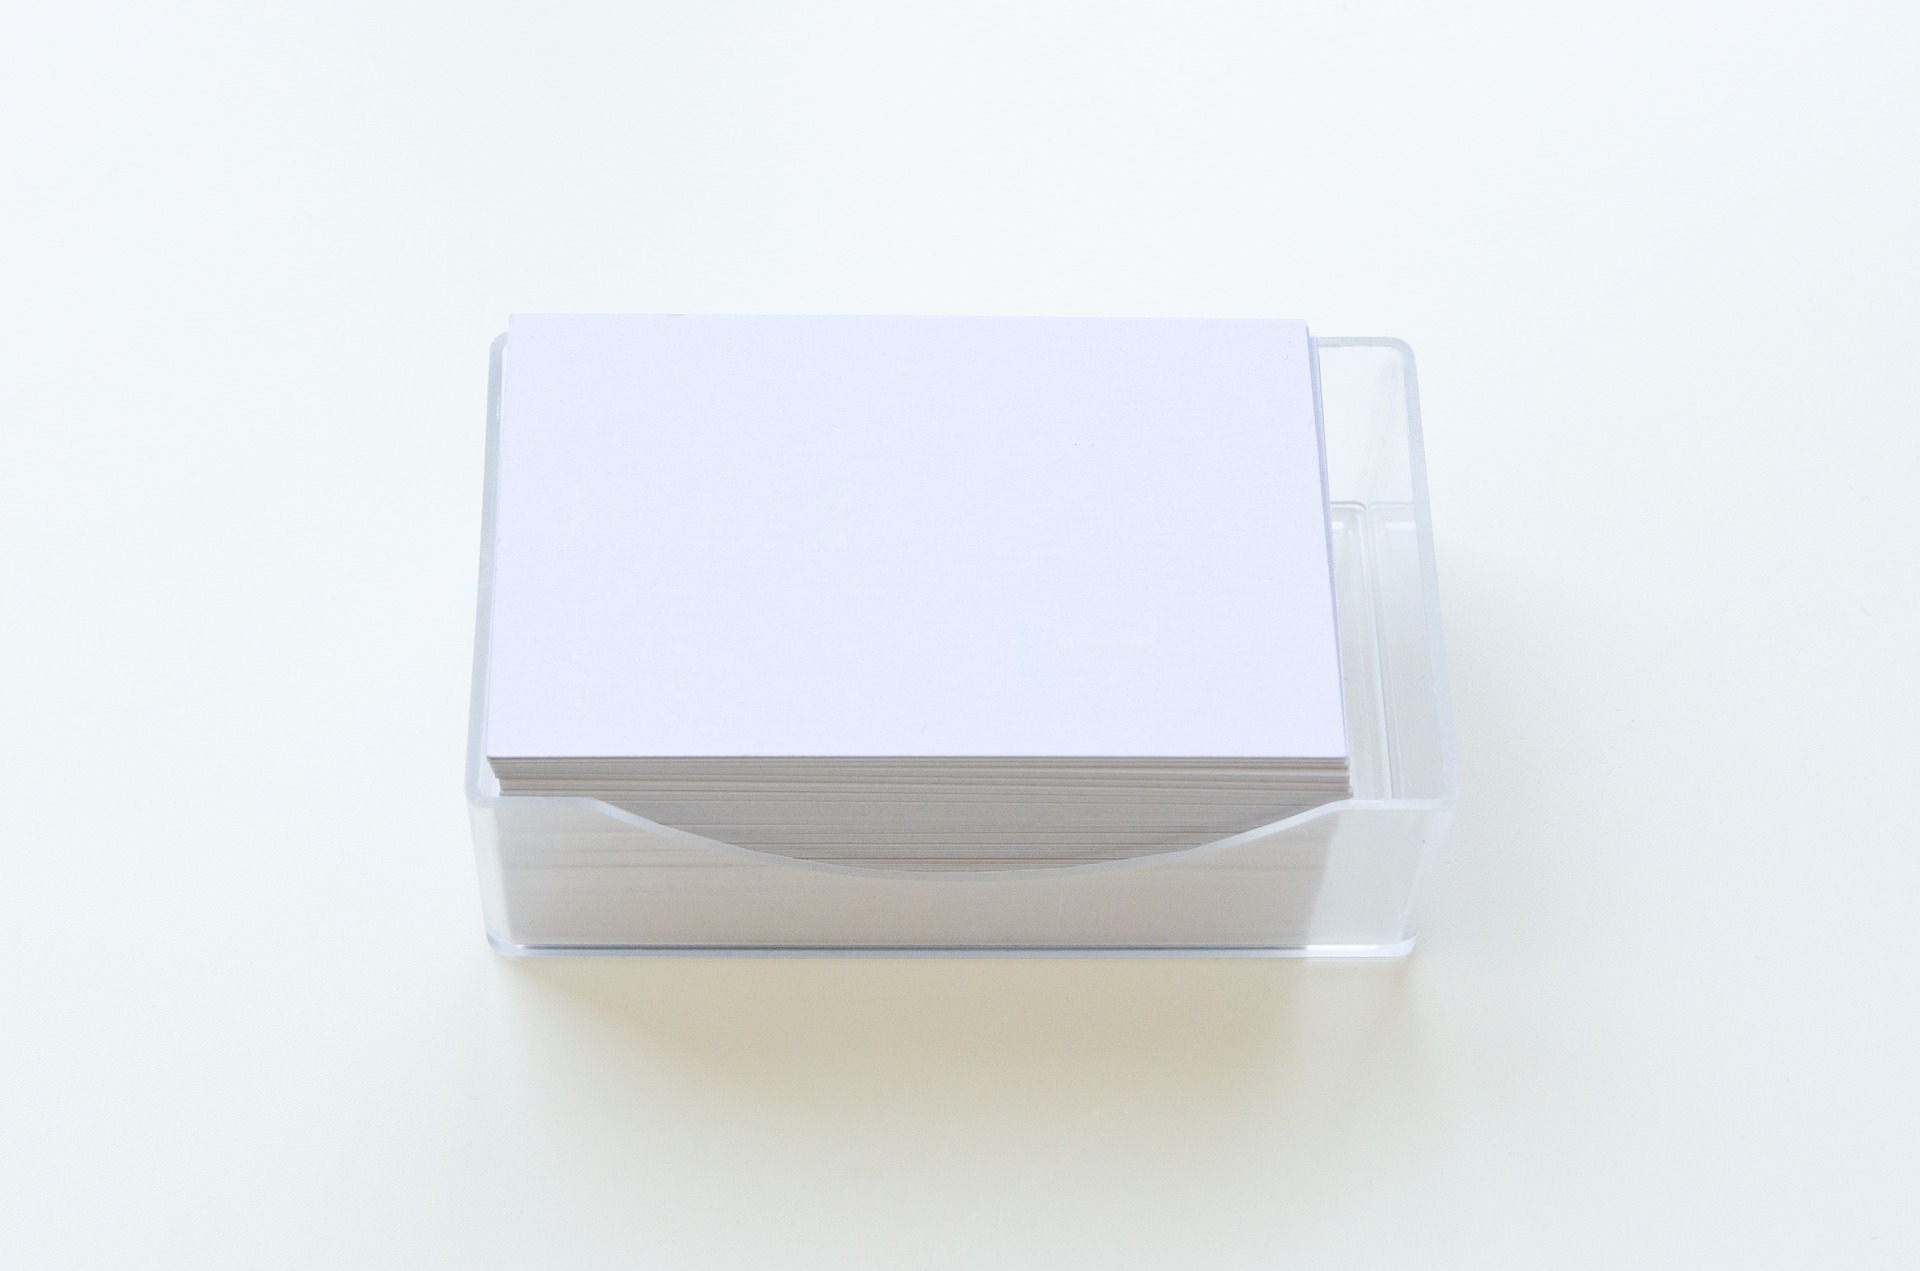 A custom business card holder is a practical and personalized gift.